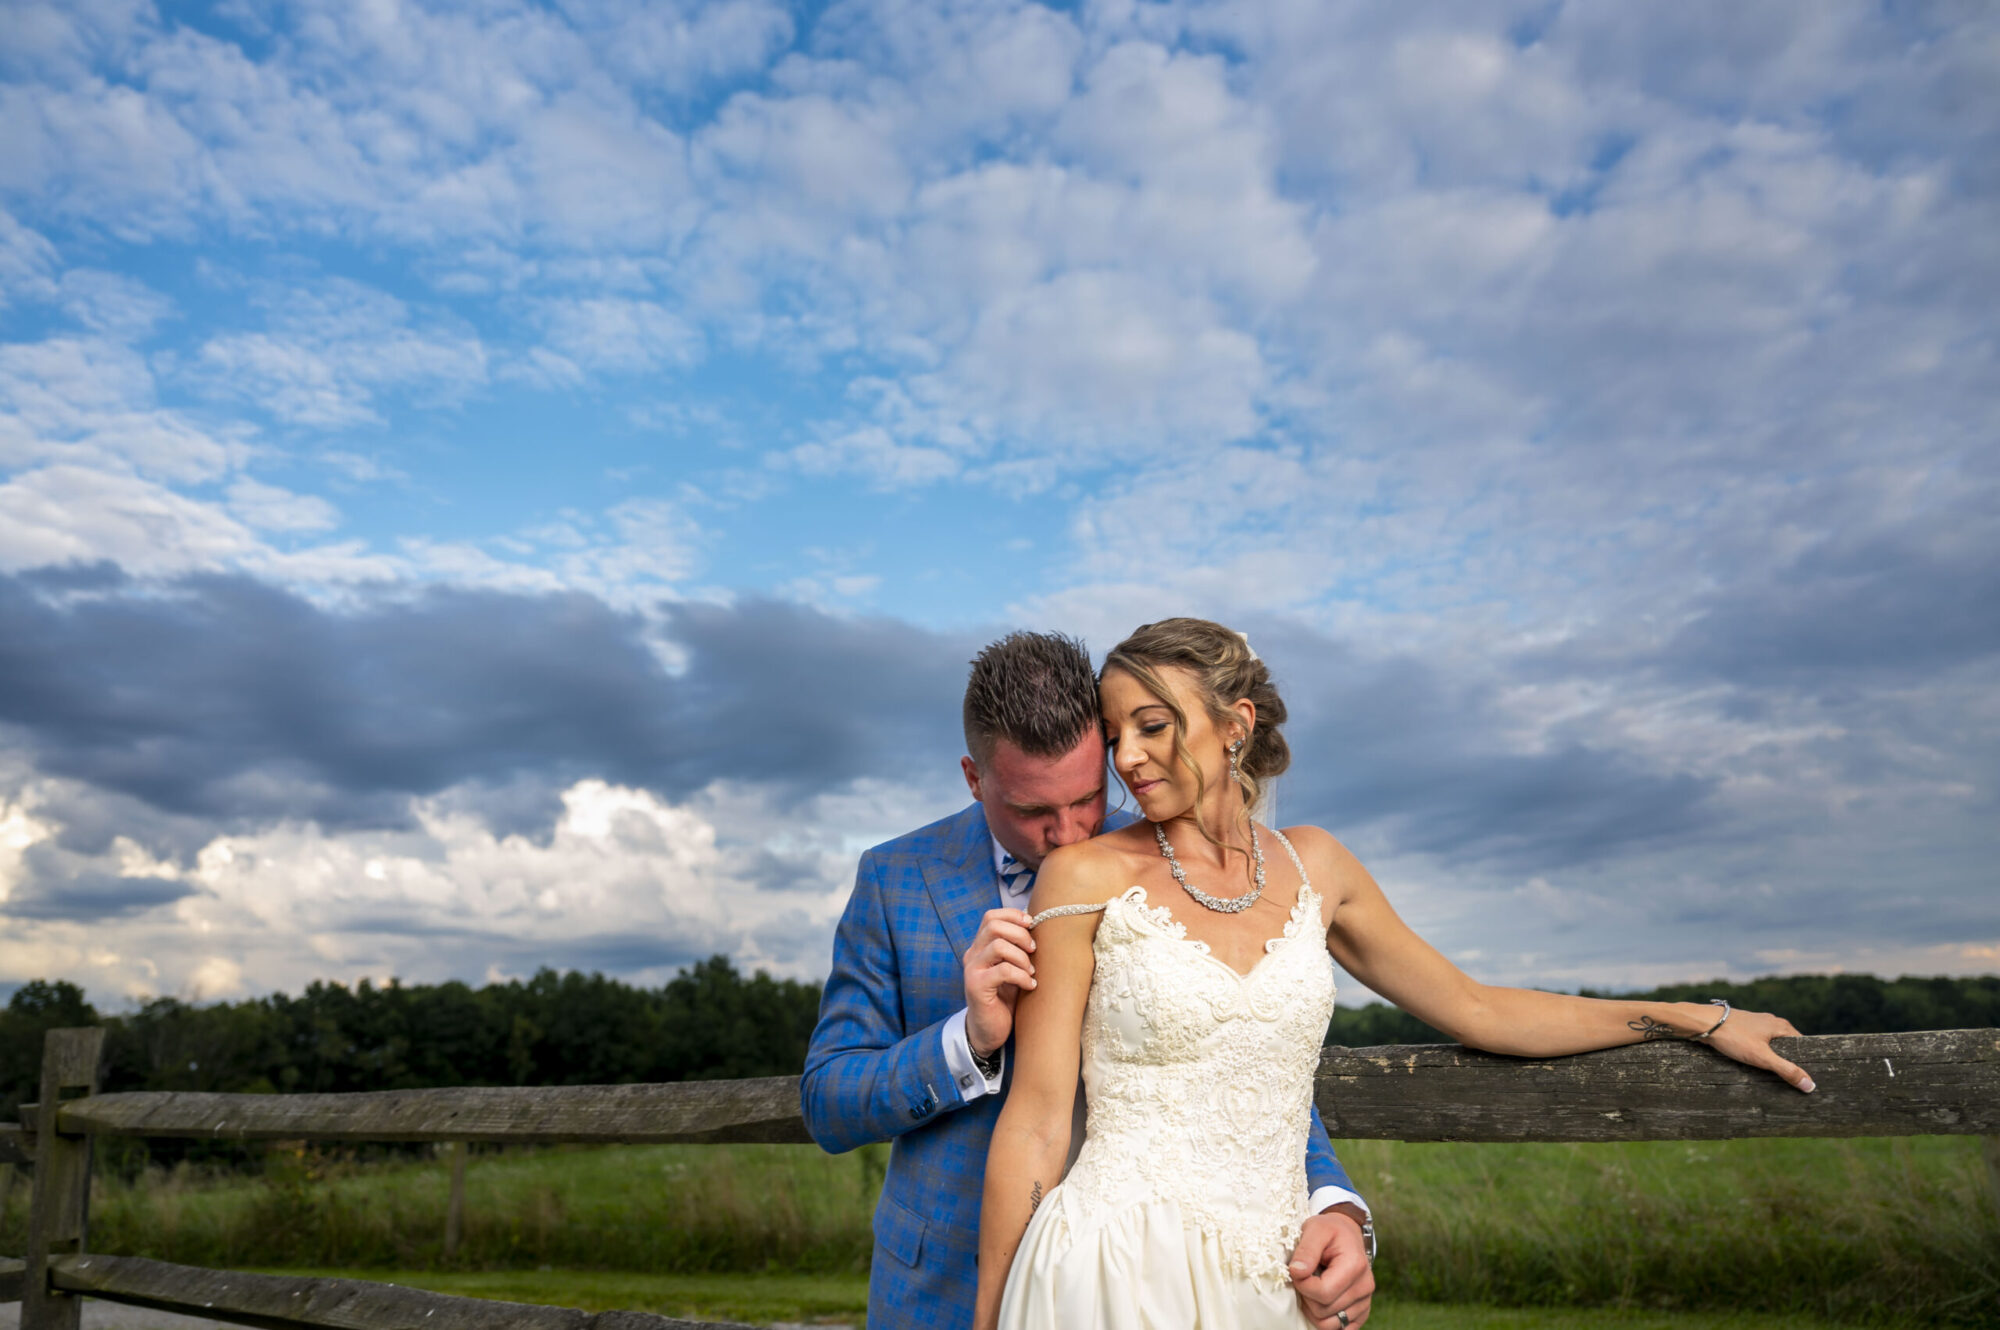 A groom in a blue suit kissing the bare shoulder of his bride in a beautiful landscape with cloudy blue sky. Bride wears a dress with a shoulder strap being pulled down by the groom. Family and wedding photography in Pittsburgh.